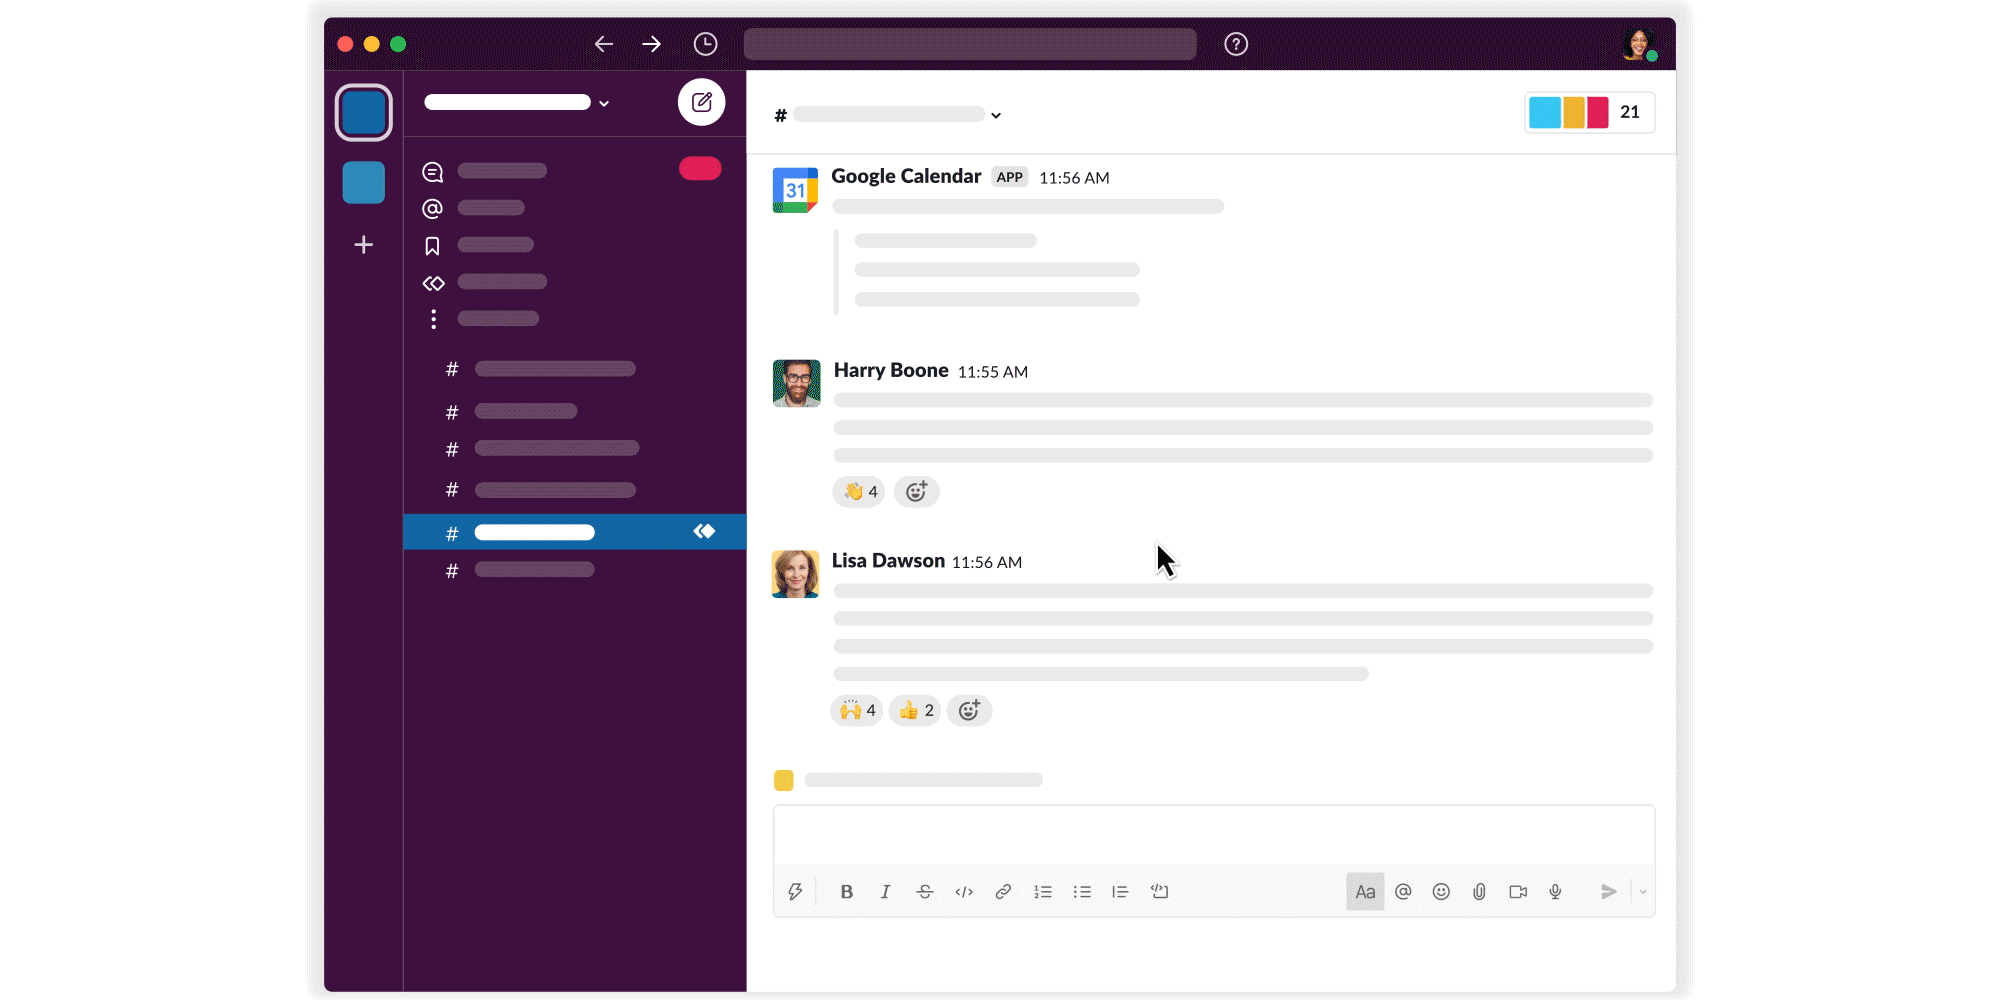 With clips, users can leave quick and simple video or audio messages right from any Slack channel or DM, providing them with more flexible and asynchronous ways of communicating with their team.